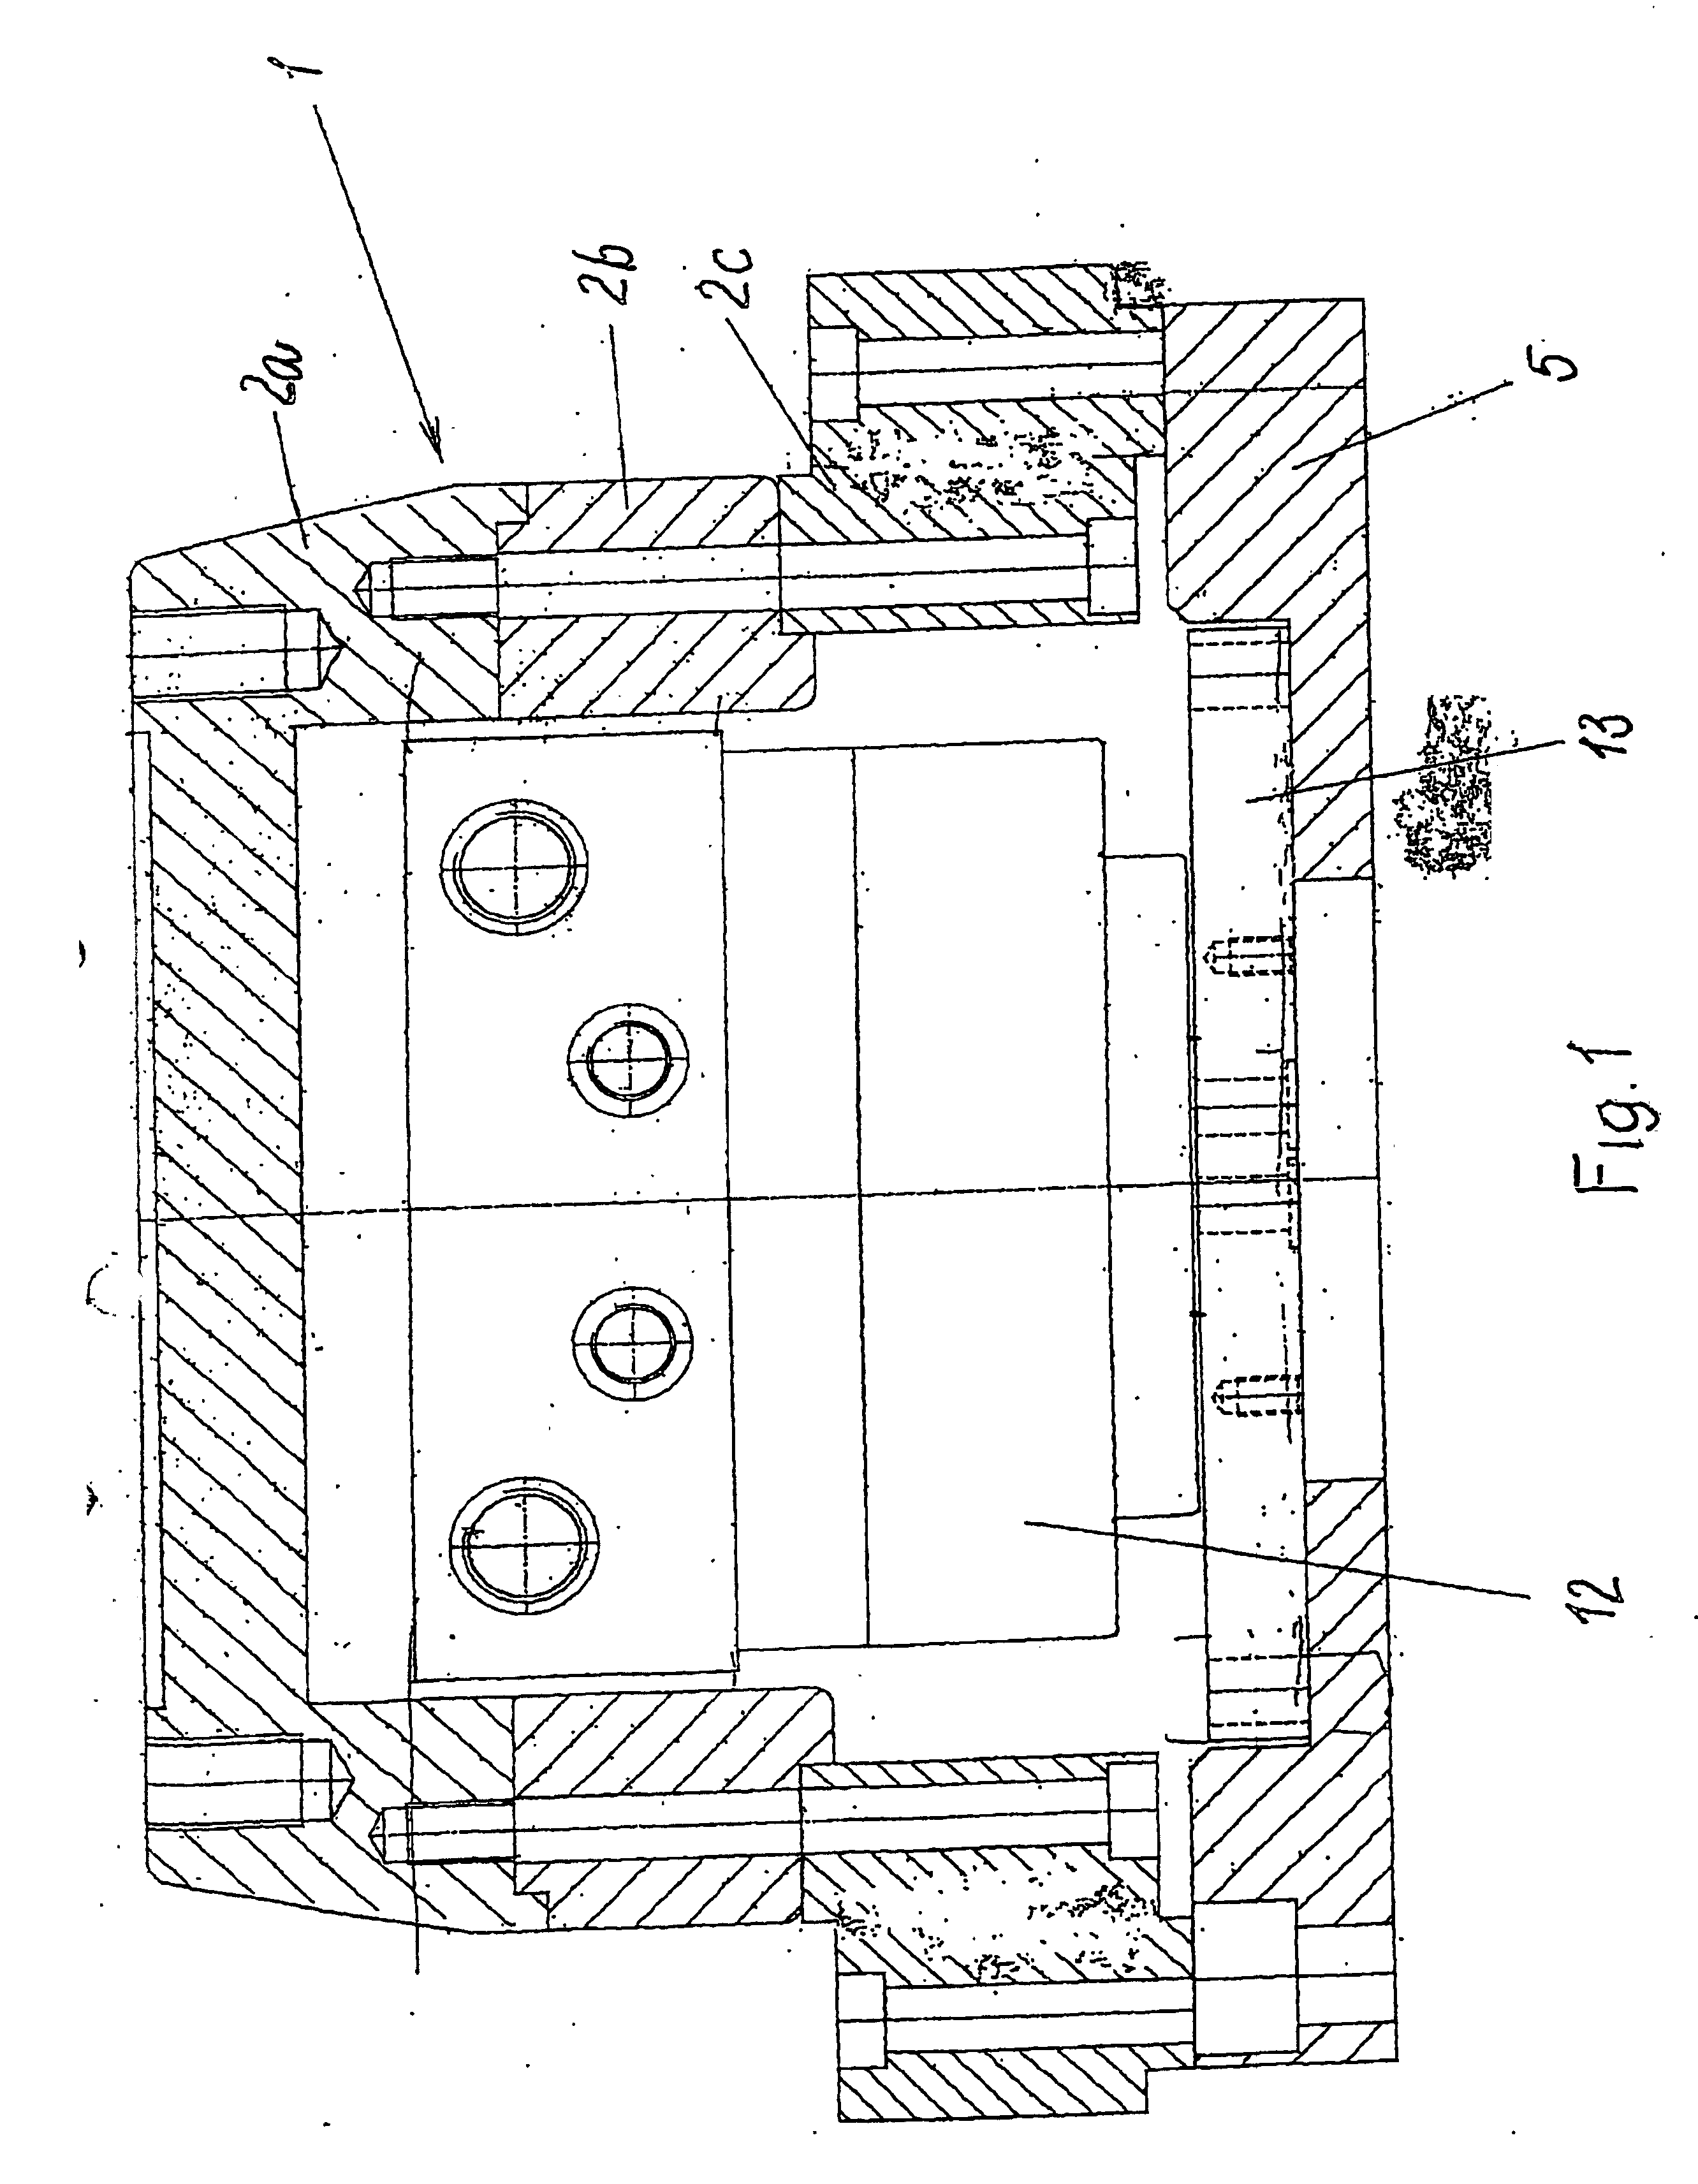 Fixing device comprising a rotary drive for a gripper tool